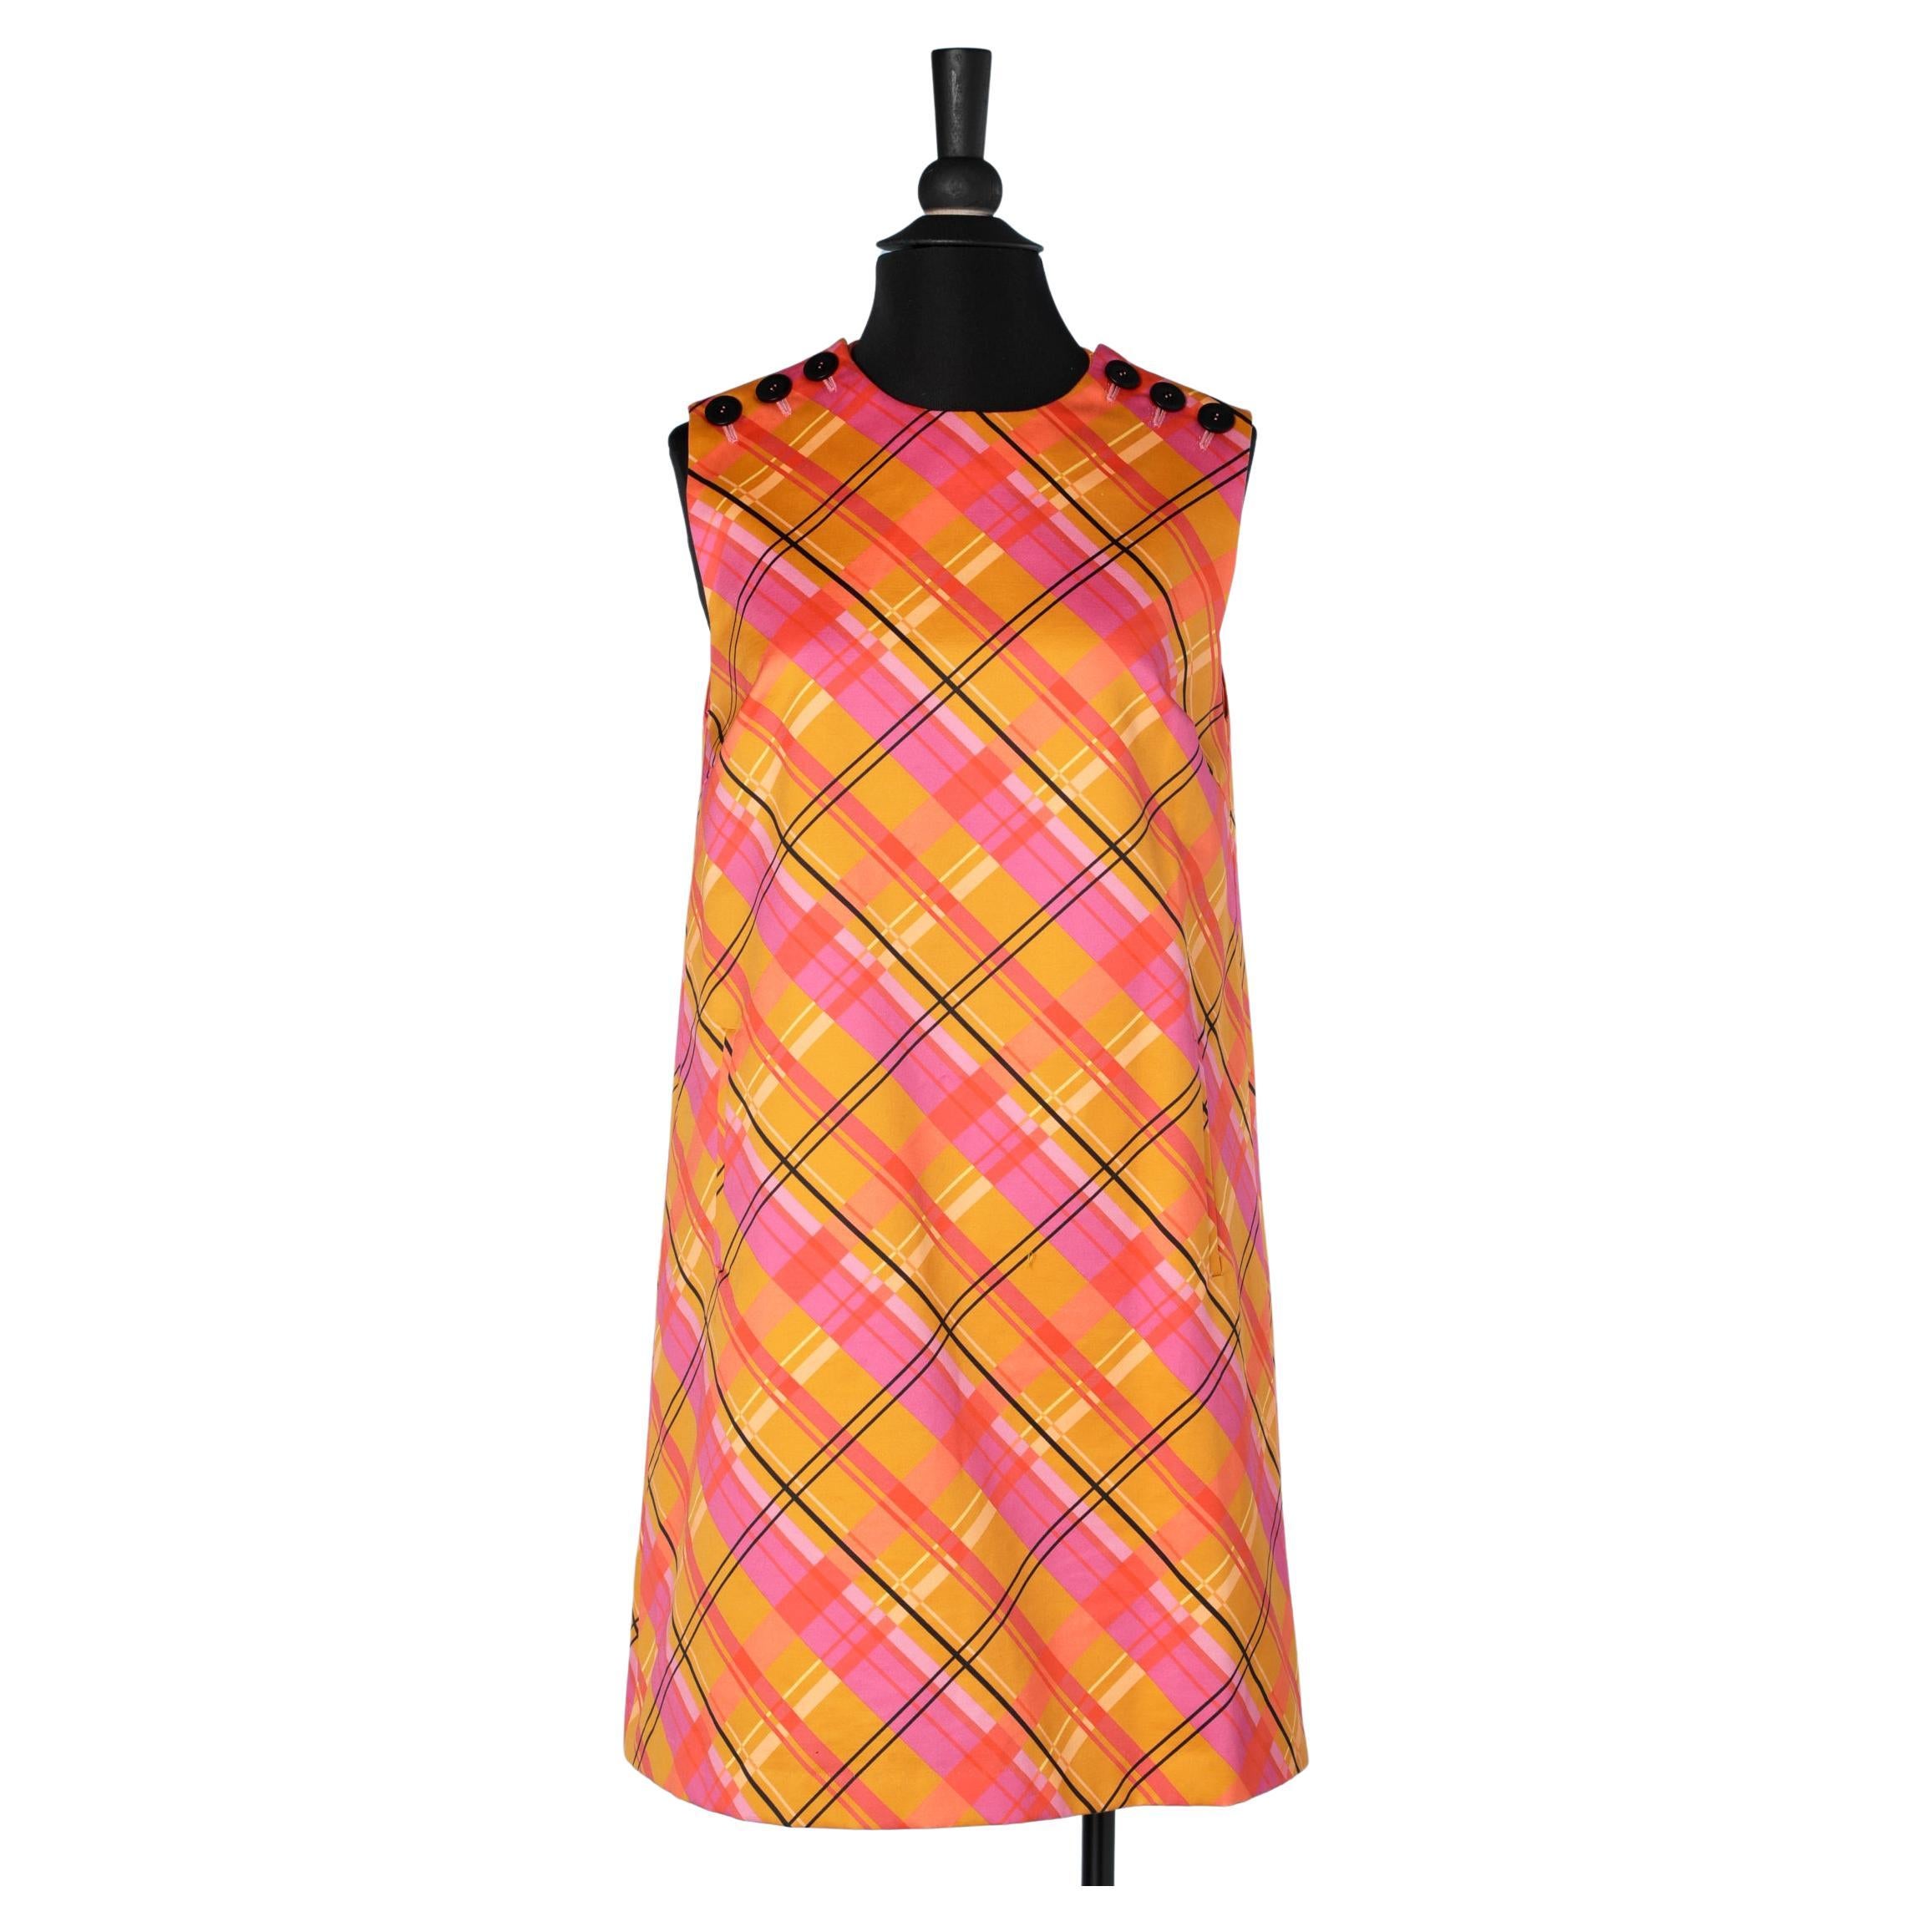 Orange and pink check sleeveless dress with buttons on shoulders Mila Schon 